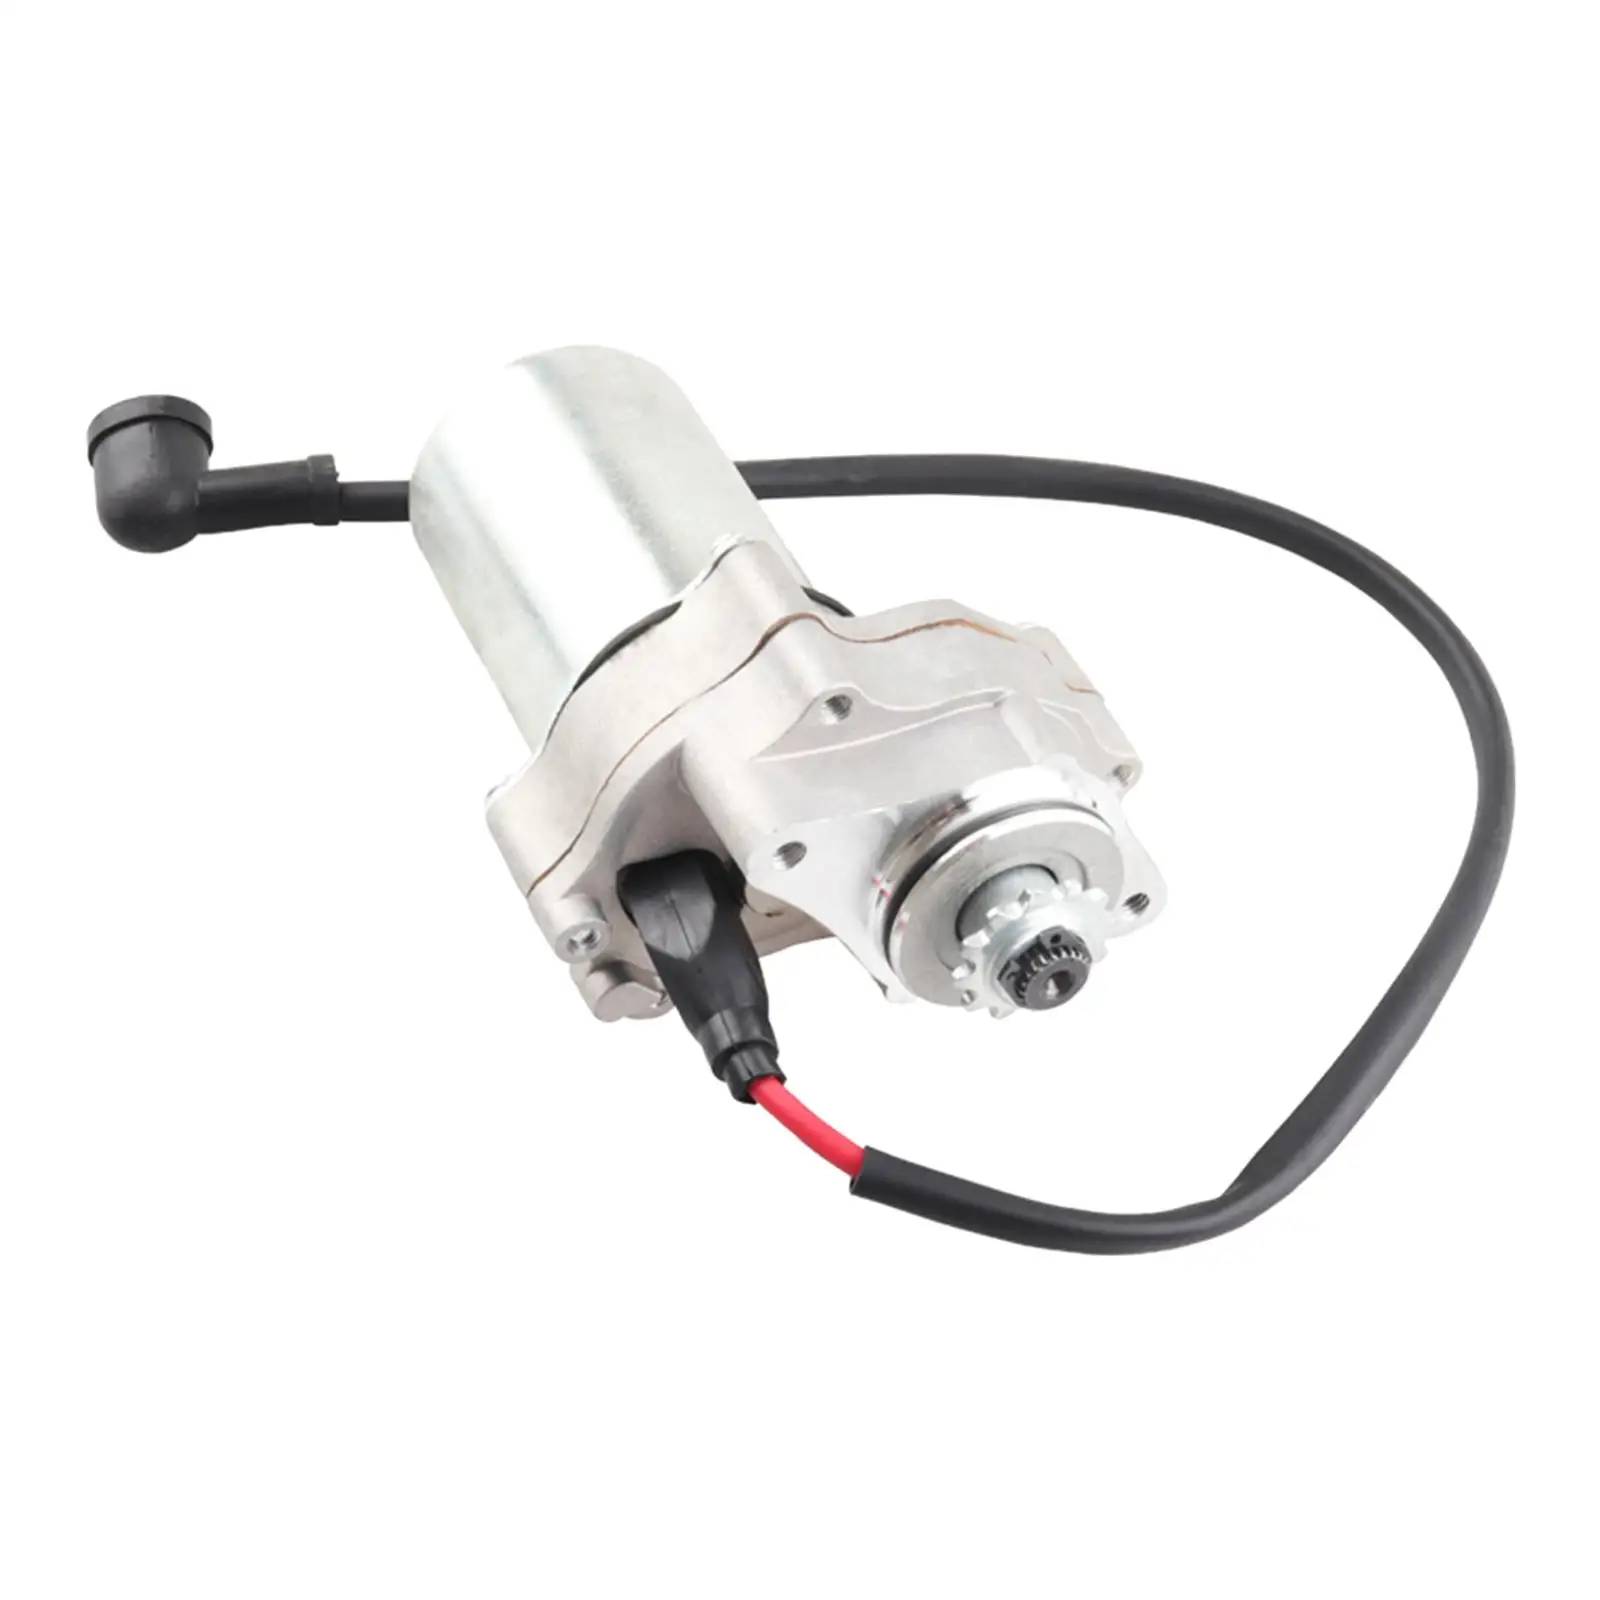 3 Bolt Starter Motor Durable with Line Accessories for 50cc 70cc 90cc 110cc Dirt